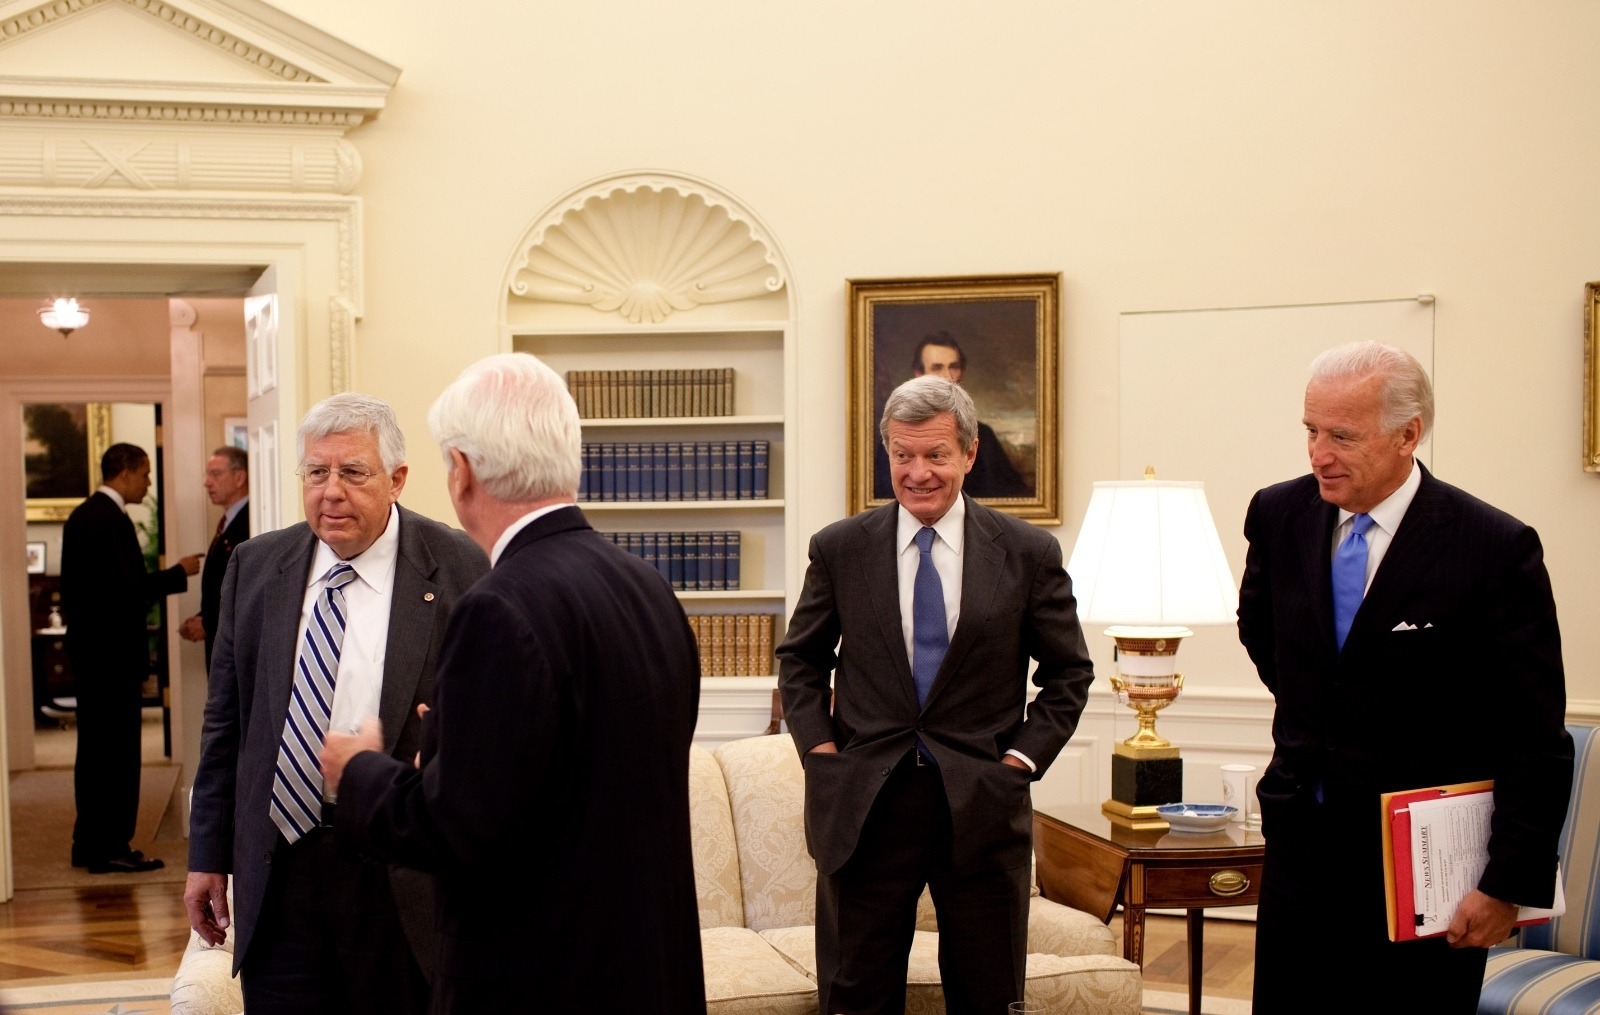 At a bi-partisan meeting in the Oval Office held in 2009 to discuss health care legislation, (l-r), President Barack Obama is seen in the background conversing with Sen. Charles Grassley (R-Iowa). In the foreground are Sen. Mike Enzi (R-Wyo), Sen. Chris Dodd (D-Conn.), Sen. Max Baucus, then chairman of the Senate Finance Committee, and Vice President Joe Biden.  Official White House Photo by Pete Souza